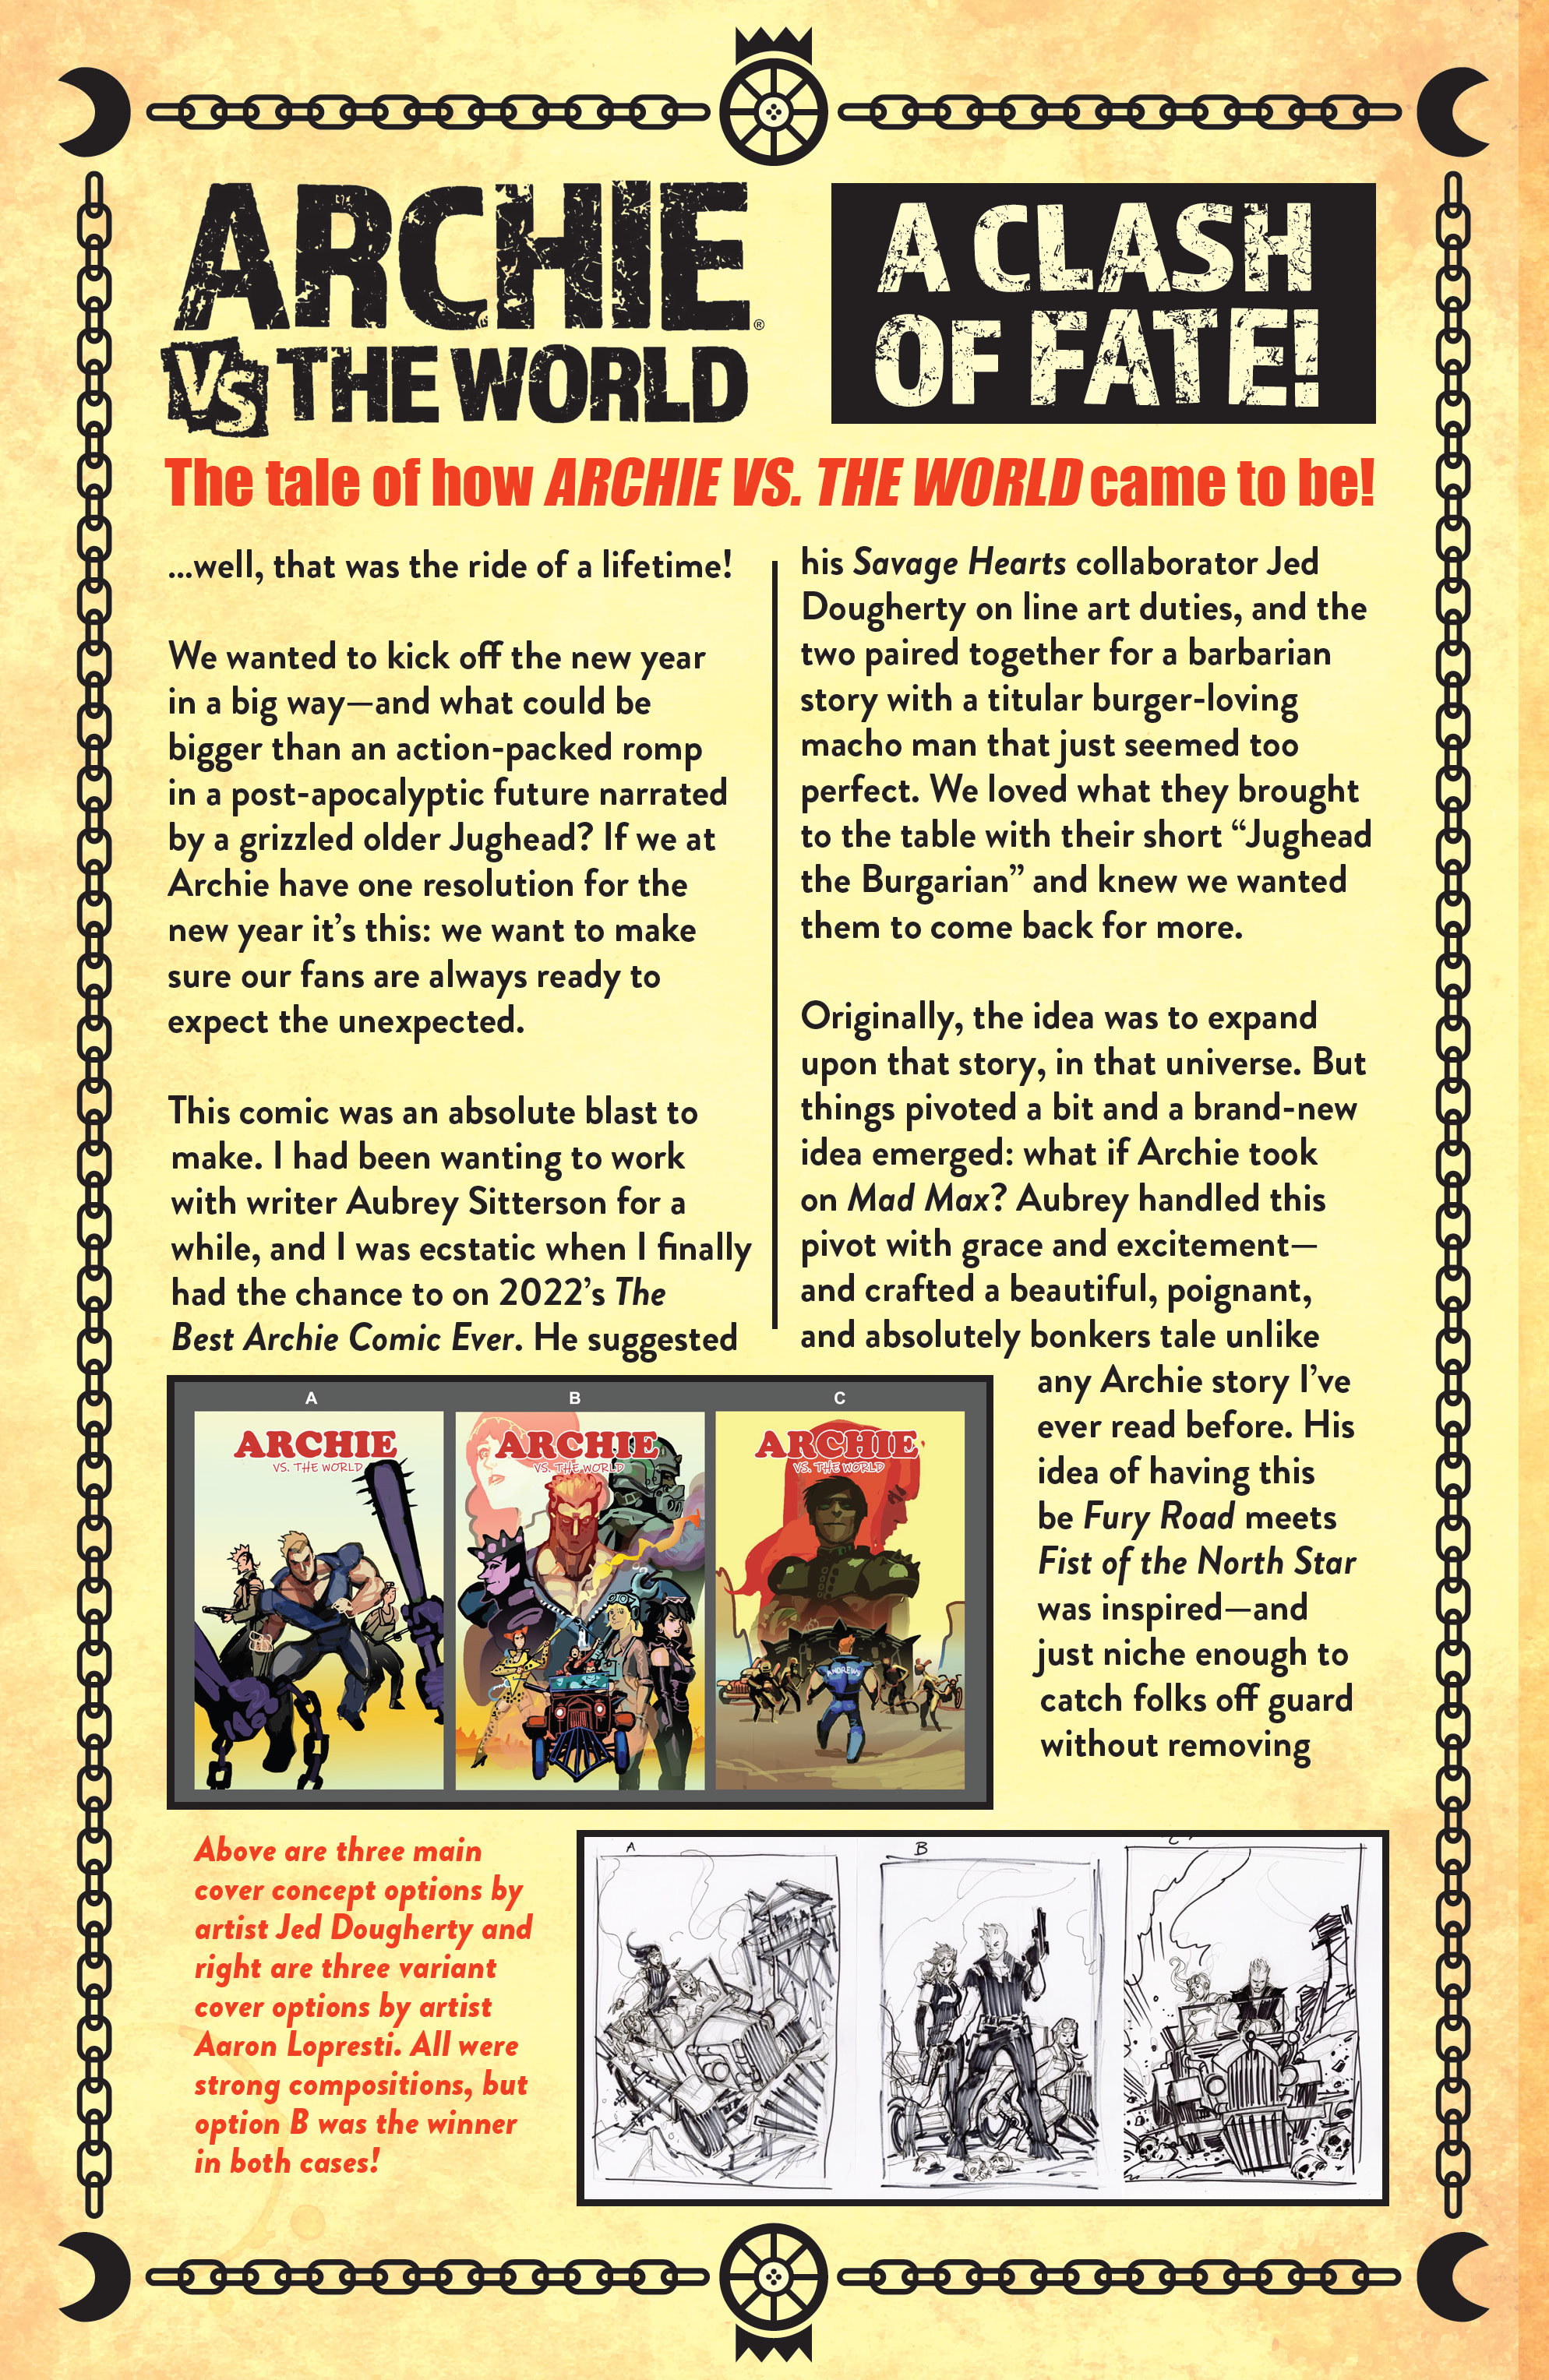 Read online Archie Vs the World comic -  Issue # Full - 19